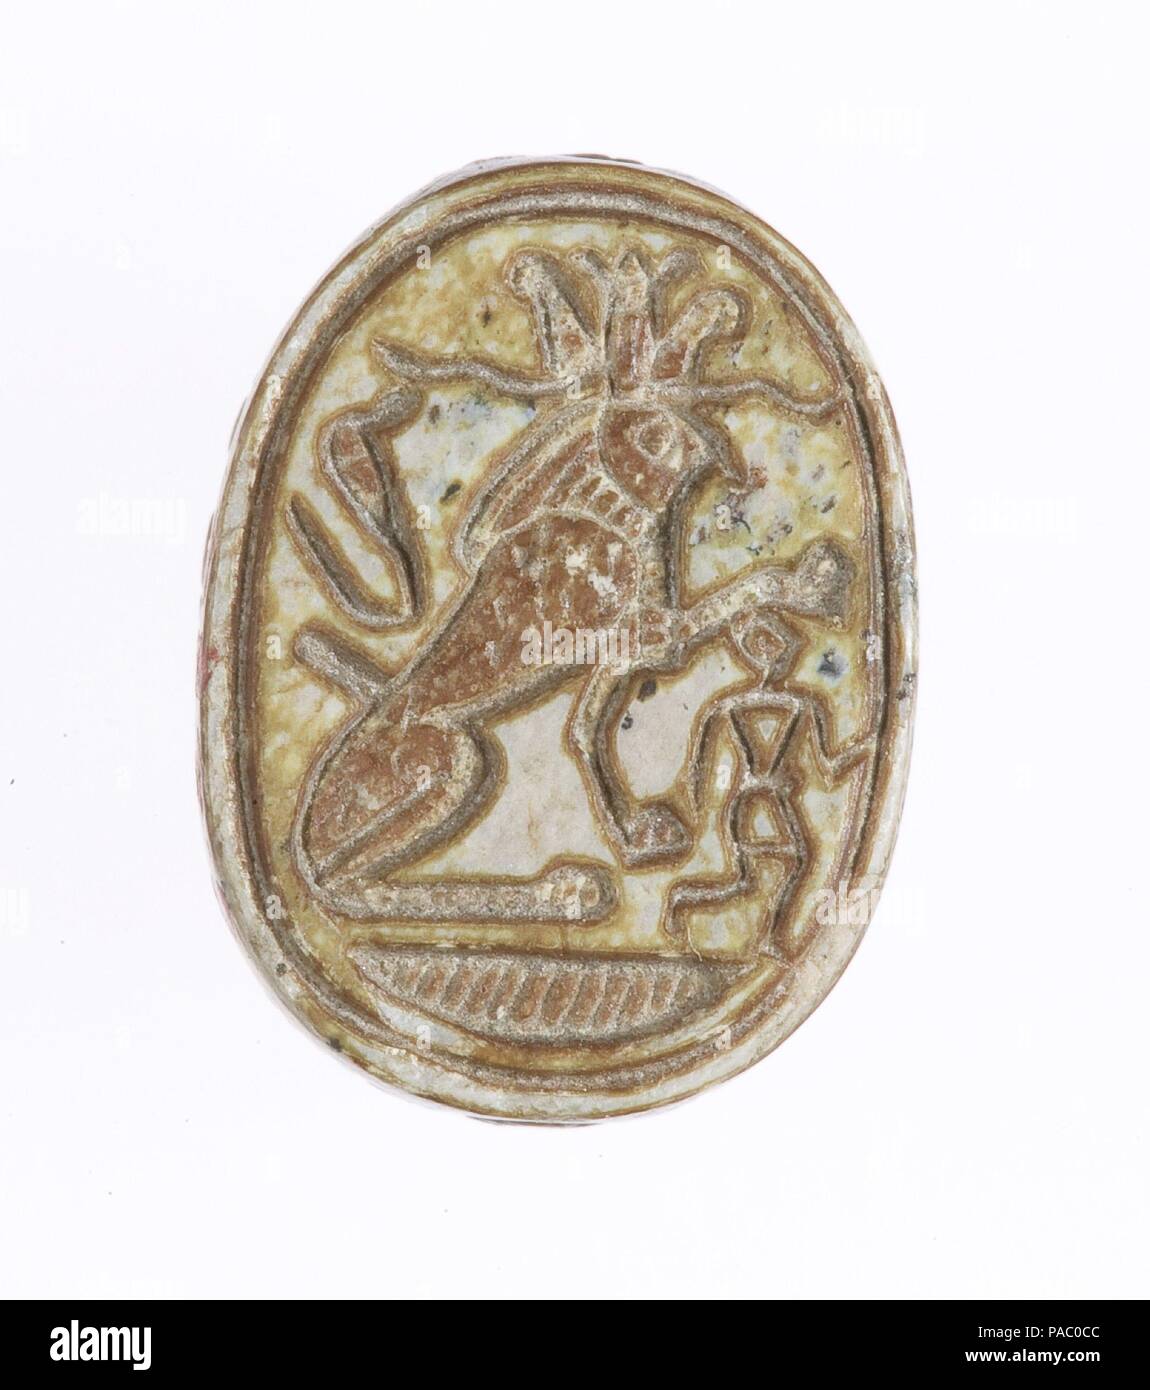 Scarab Inscribed With a Protective Motif. Dimensions: L. 1.5 cm (9/16 in); w. 1.2 cm (1/2 in); th. 0.8 cm (5/16 in). Dynasty: Dynasty 18, early. Reign: reign of Ahmose-Joint reign. Date: ca. 1550-1458 B.C..  The scarab's base depicts a falcon-headed sphinx wearing the "atef" crown while subduing an enemy of Egypt. The falcon represents Re-Herakhti - the god Horus when he is merged with the sun. Museum: Metropolitan Museum of Art, New York, USA. Stock Photo